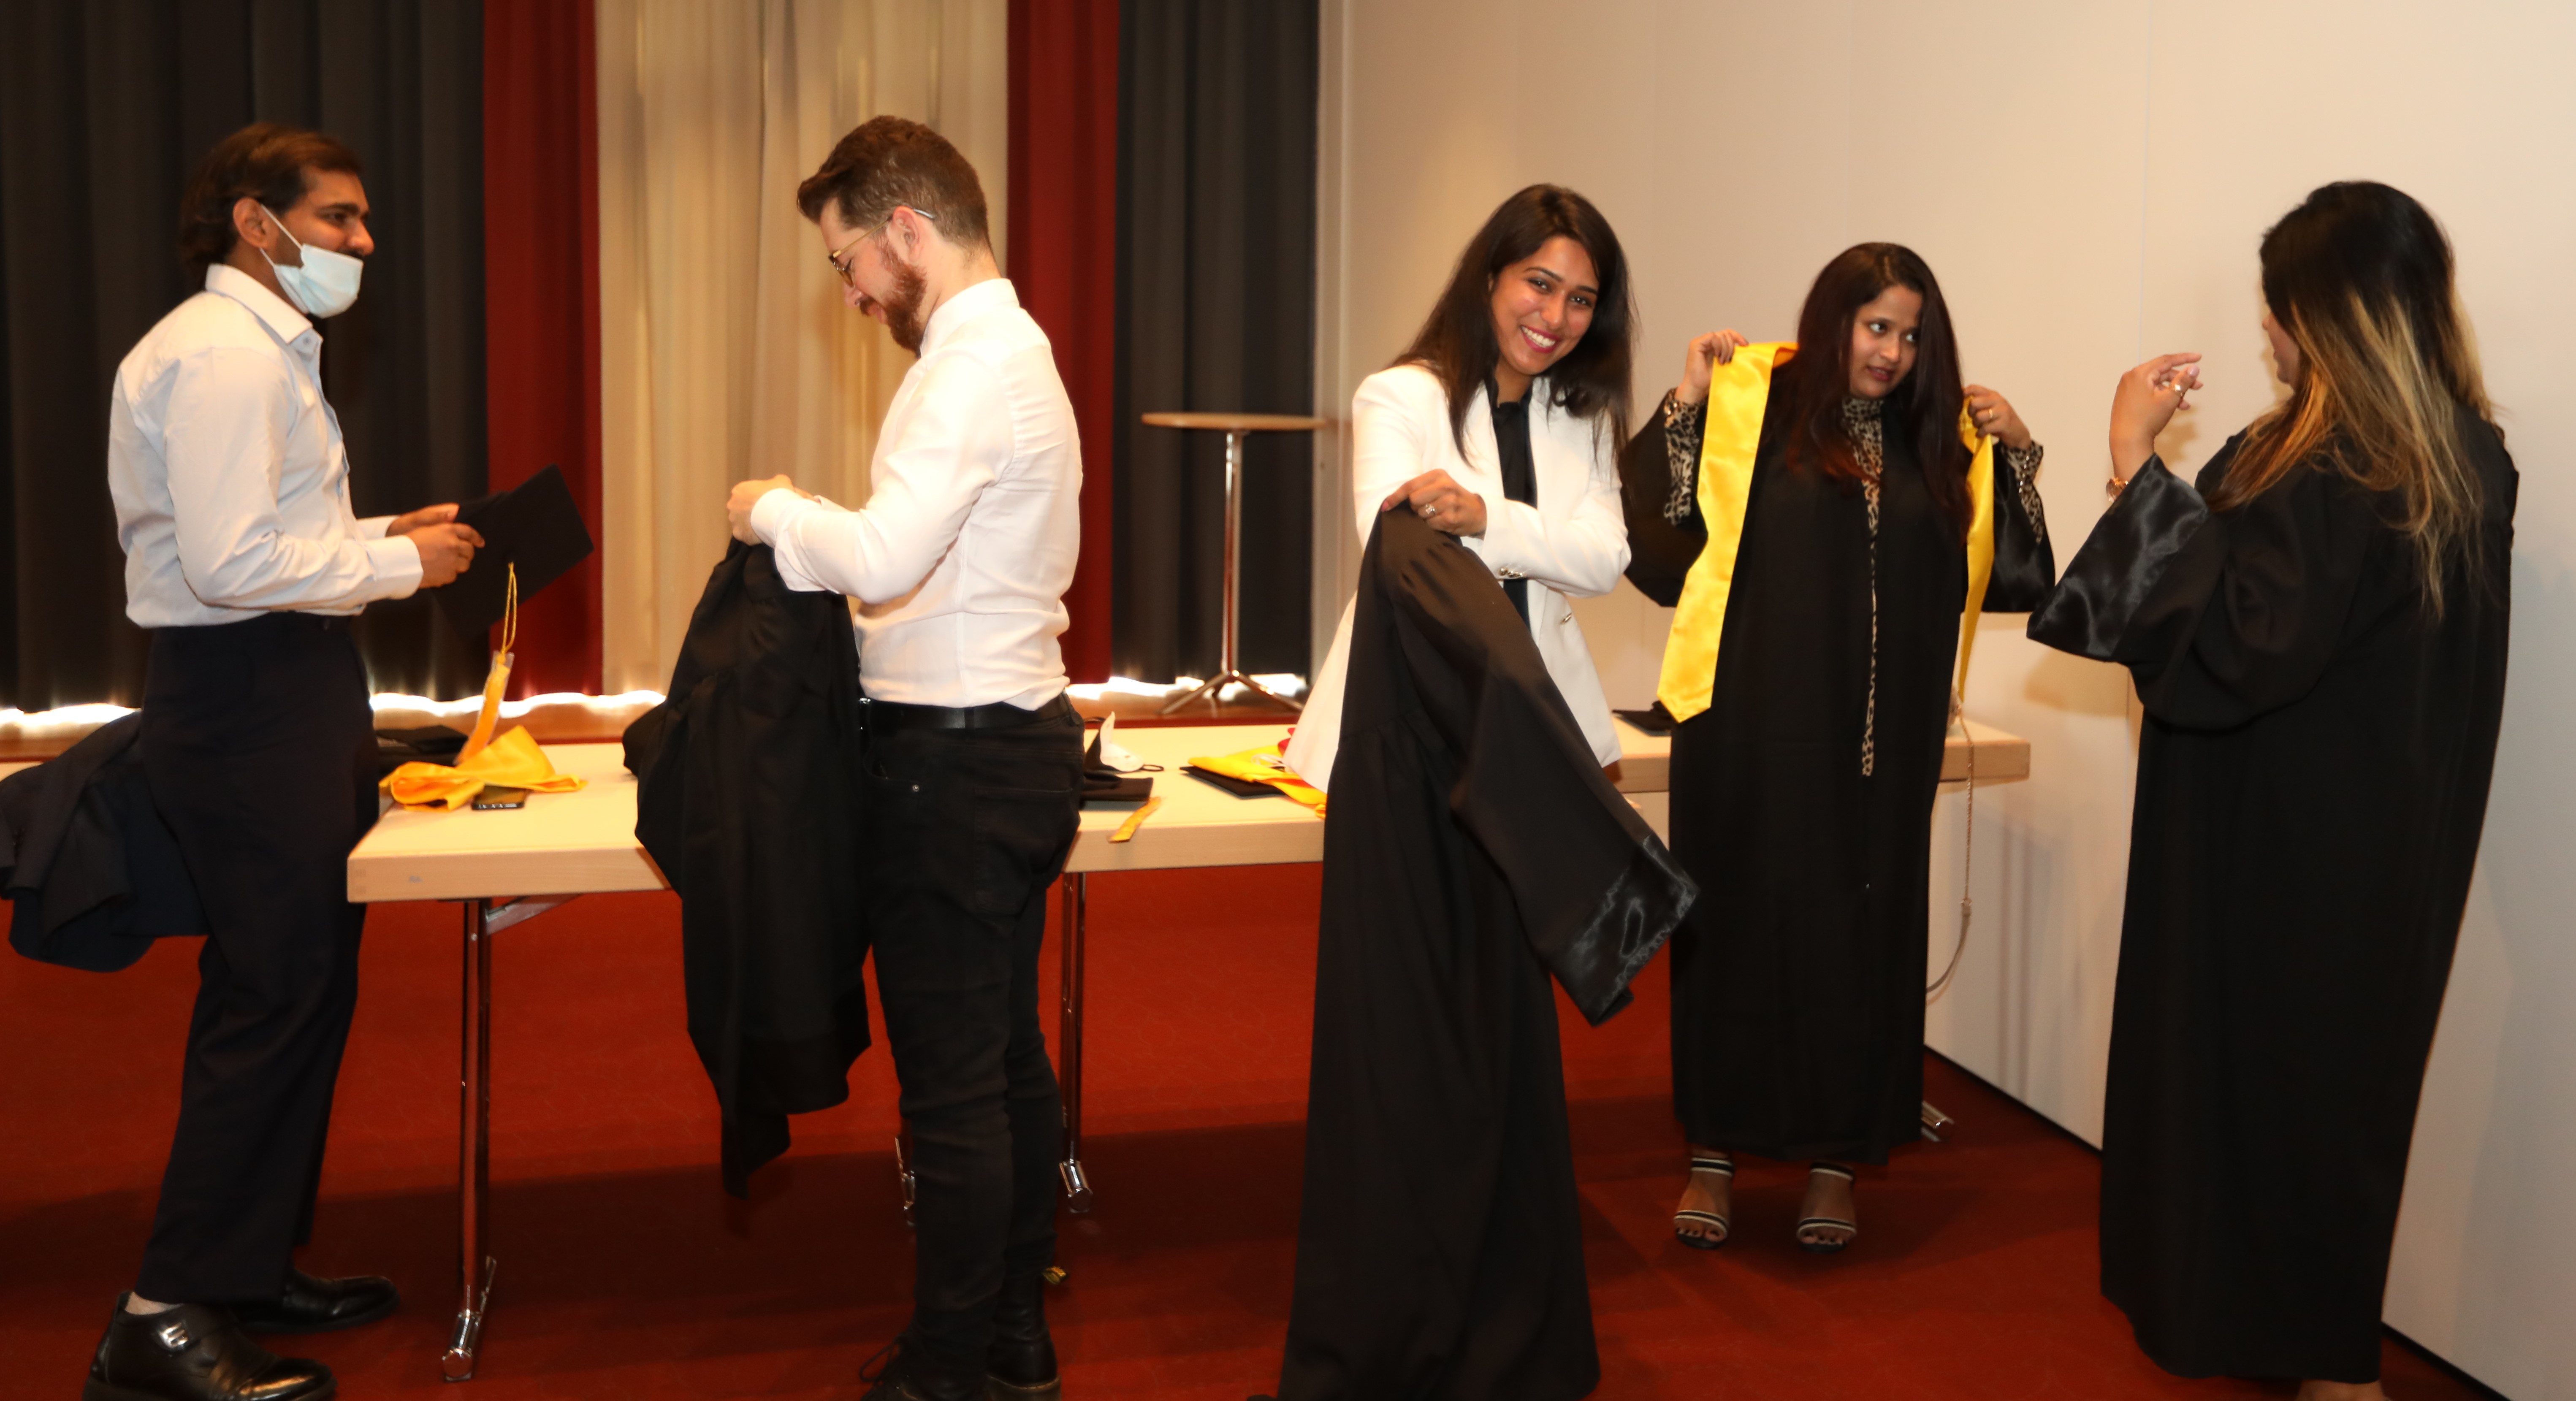 Getting ready with graduation gowns!